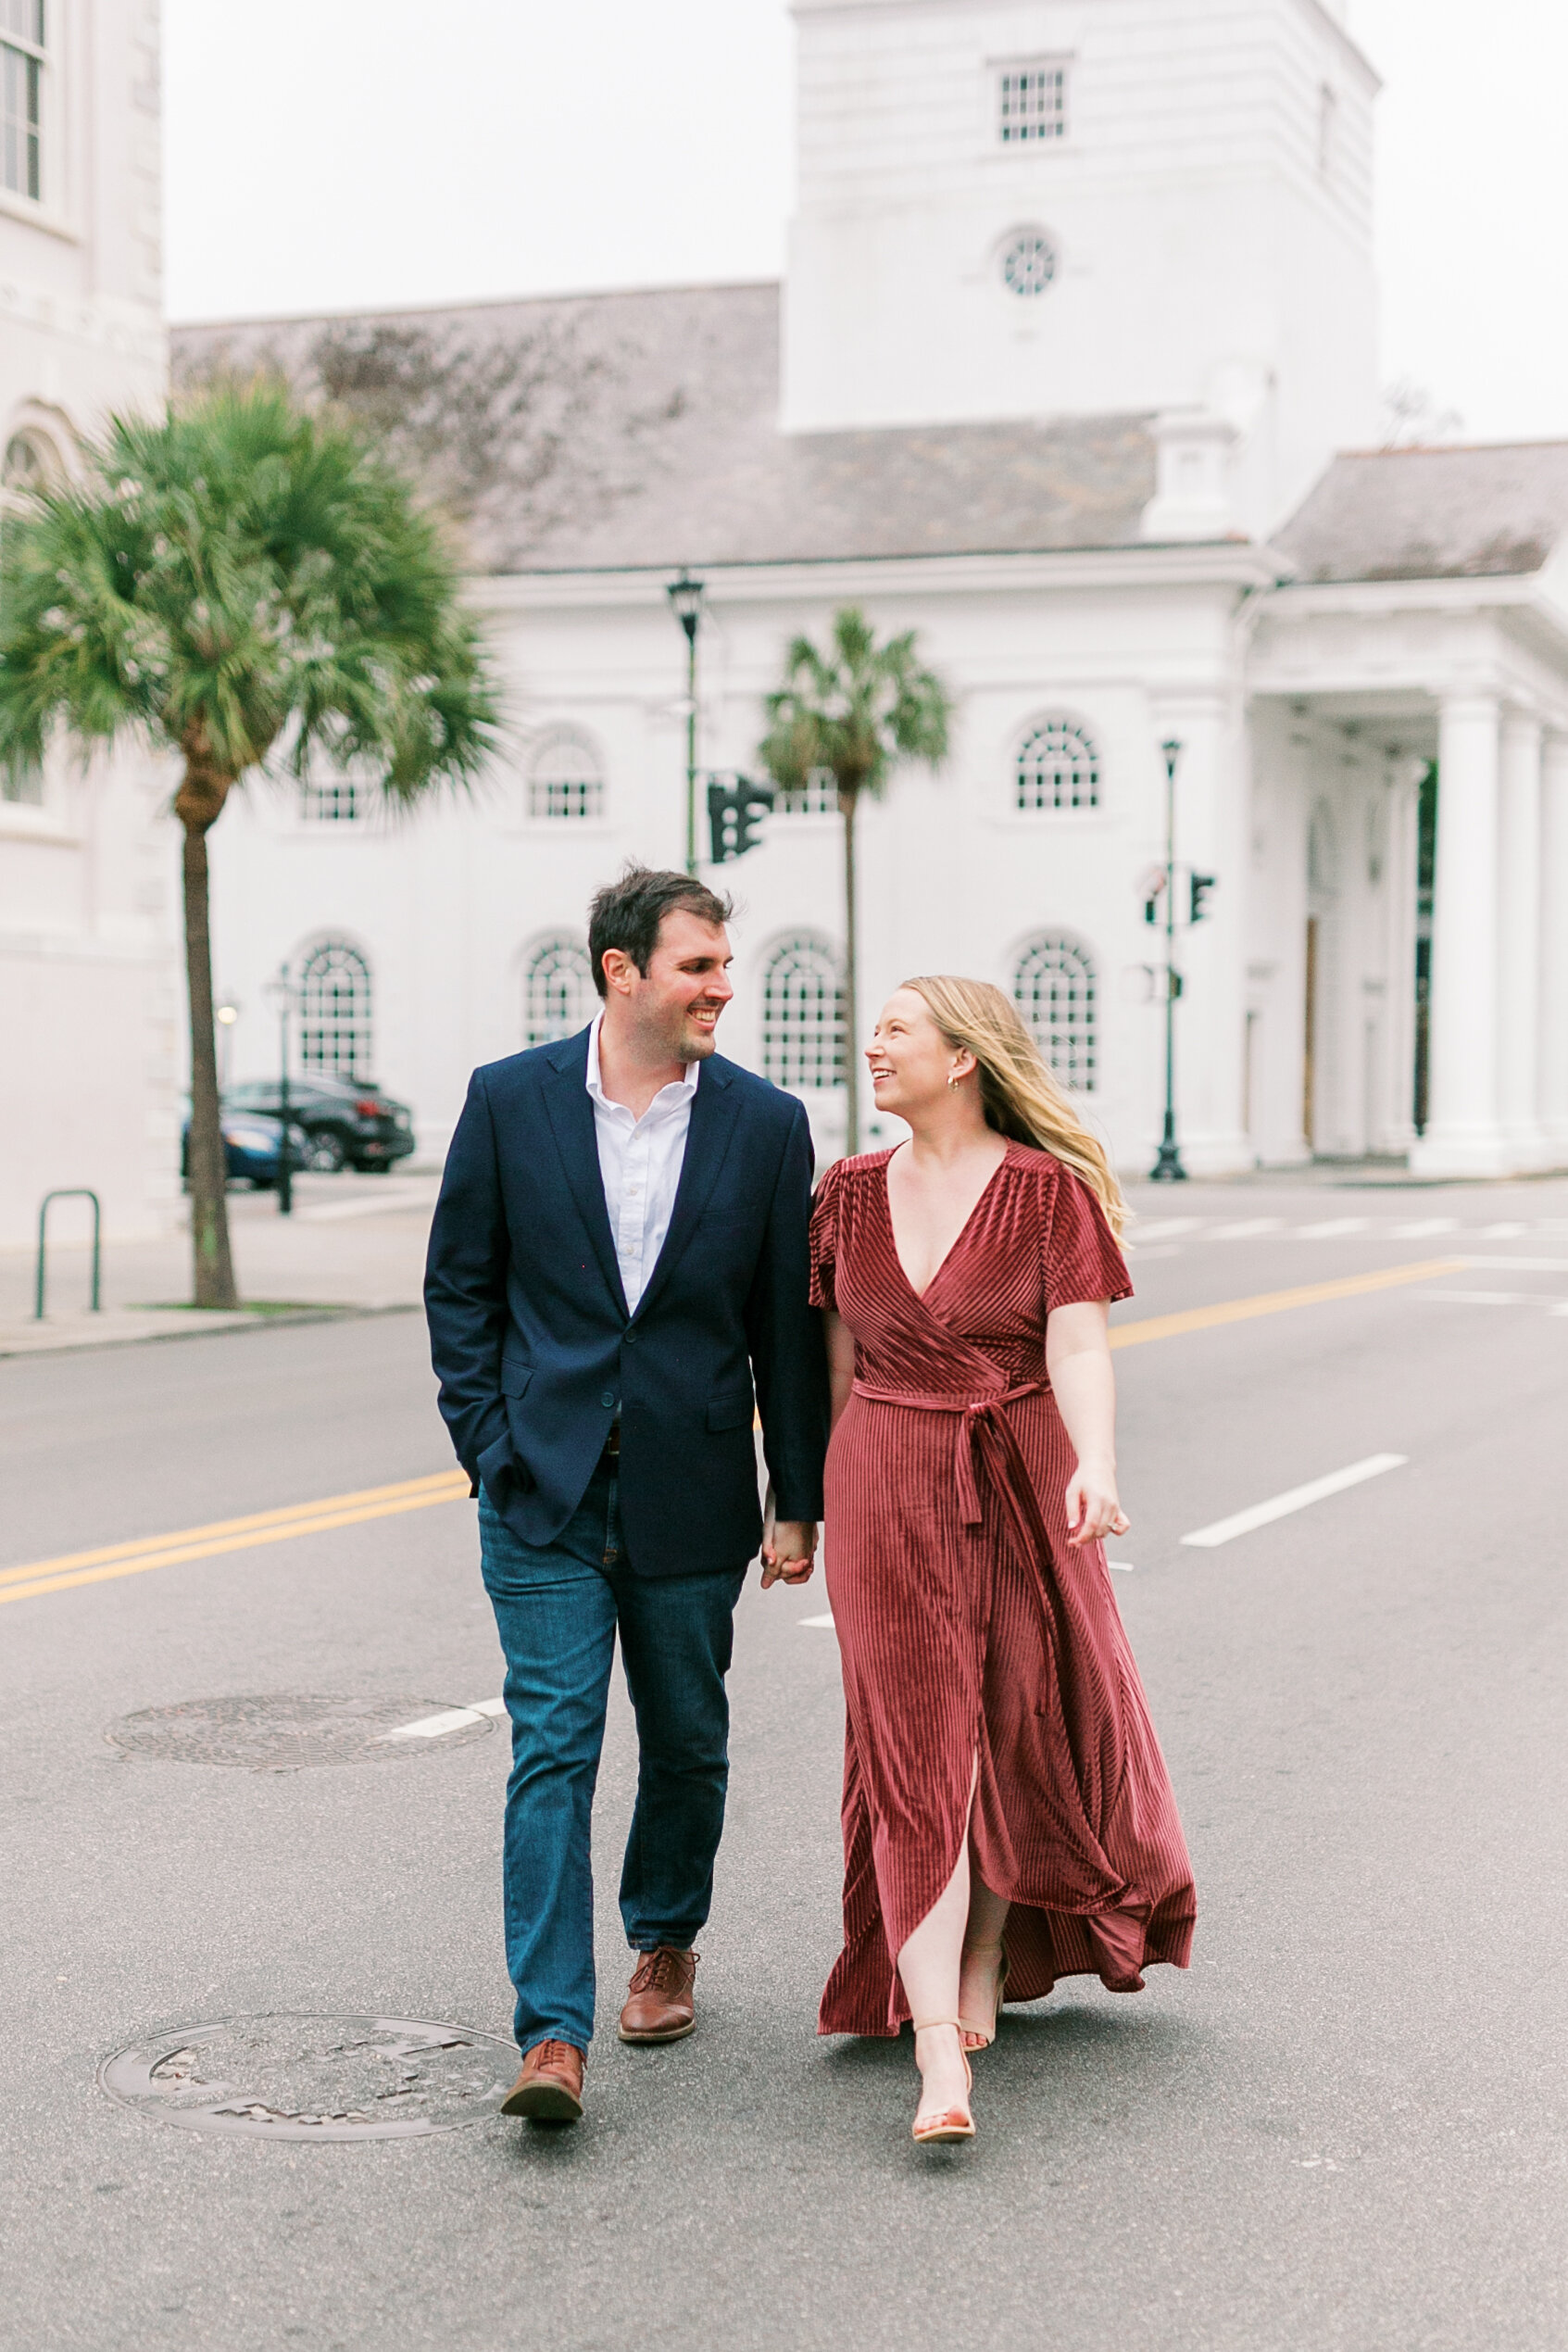 Southern bride-to-be with her fiancé in Charleston, South Carolina.